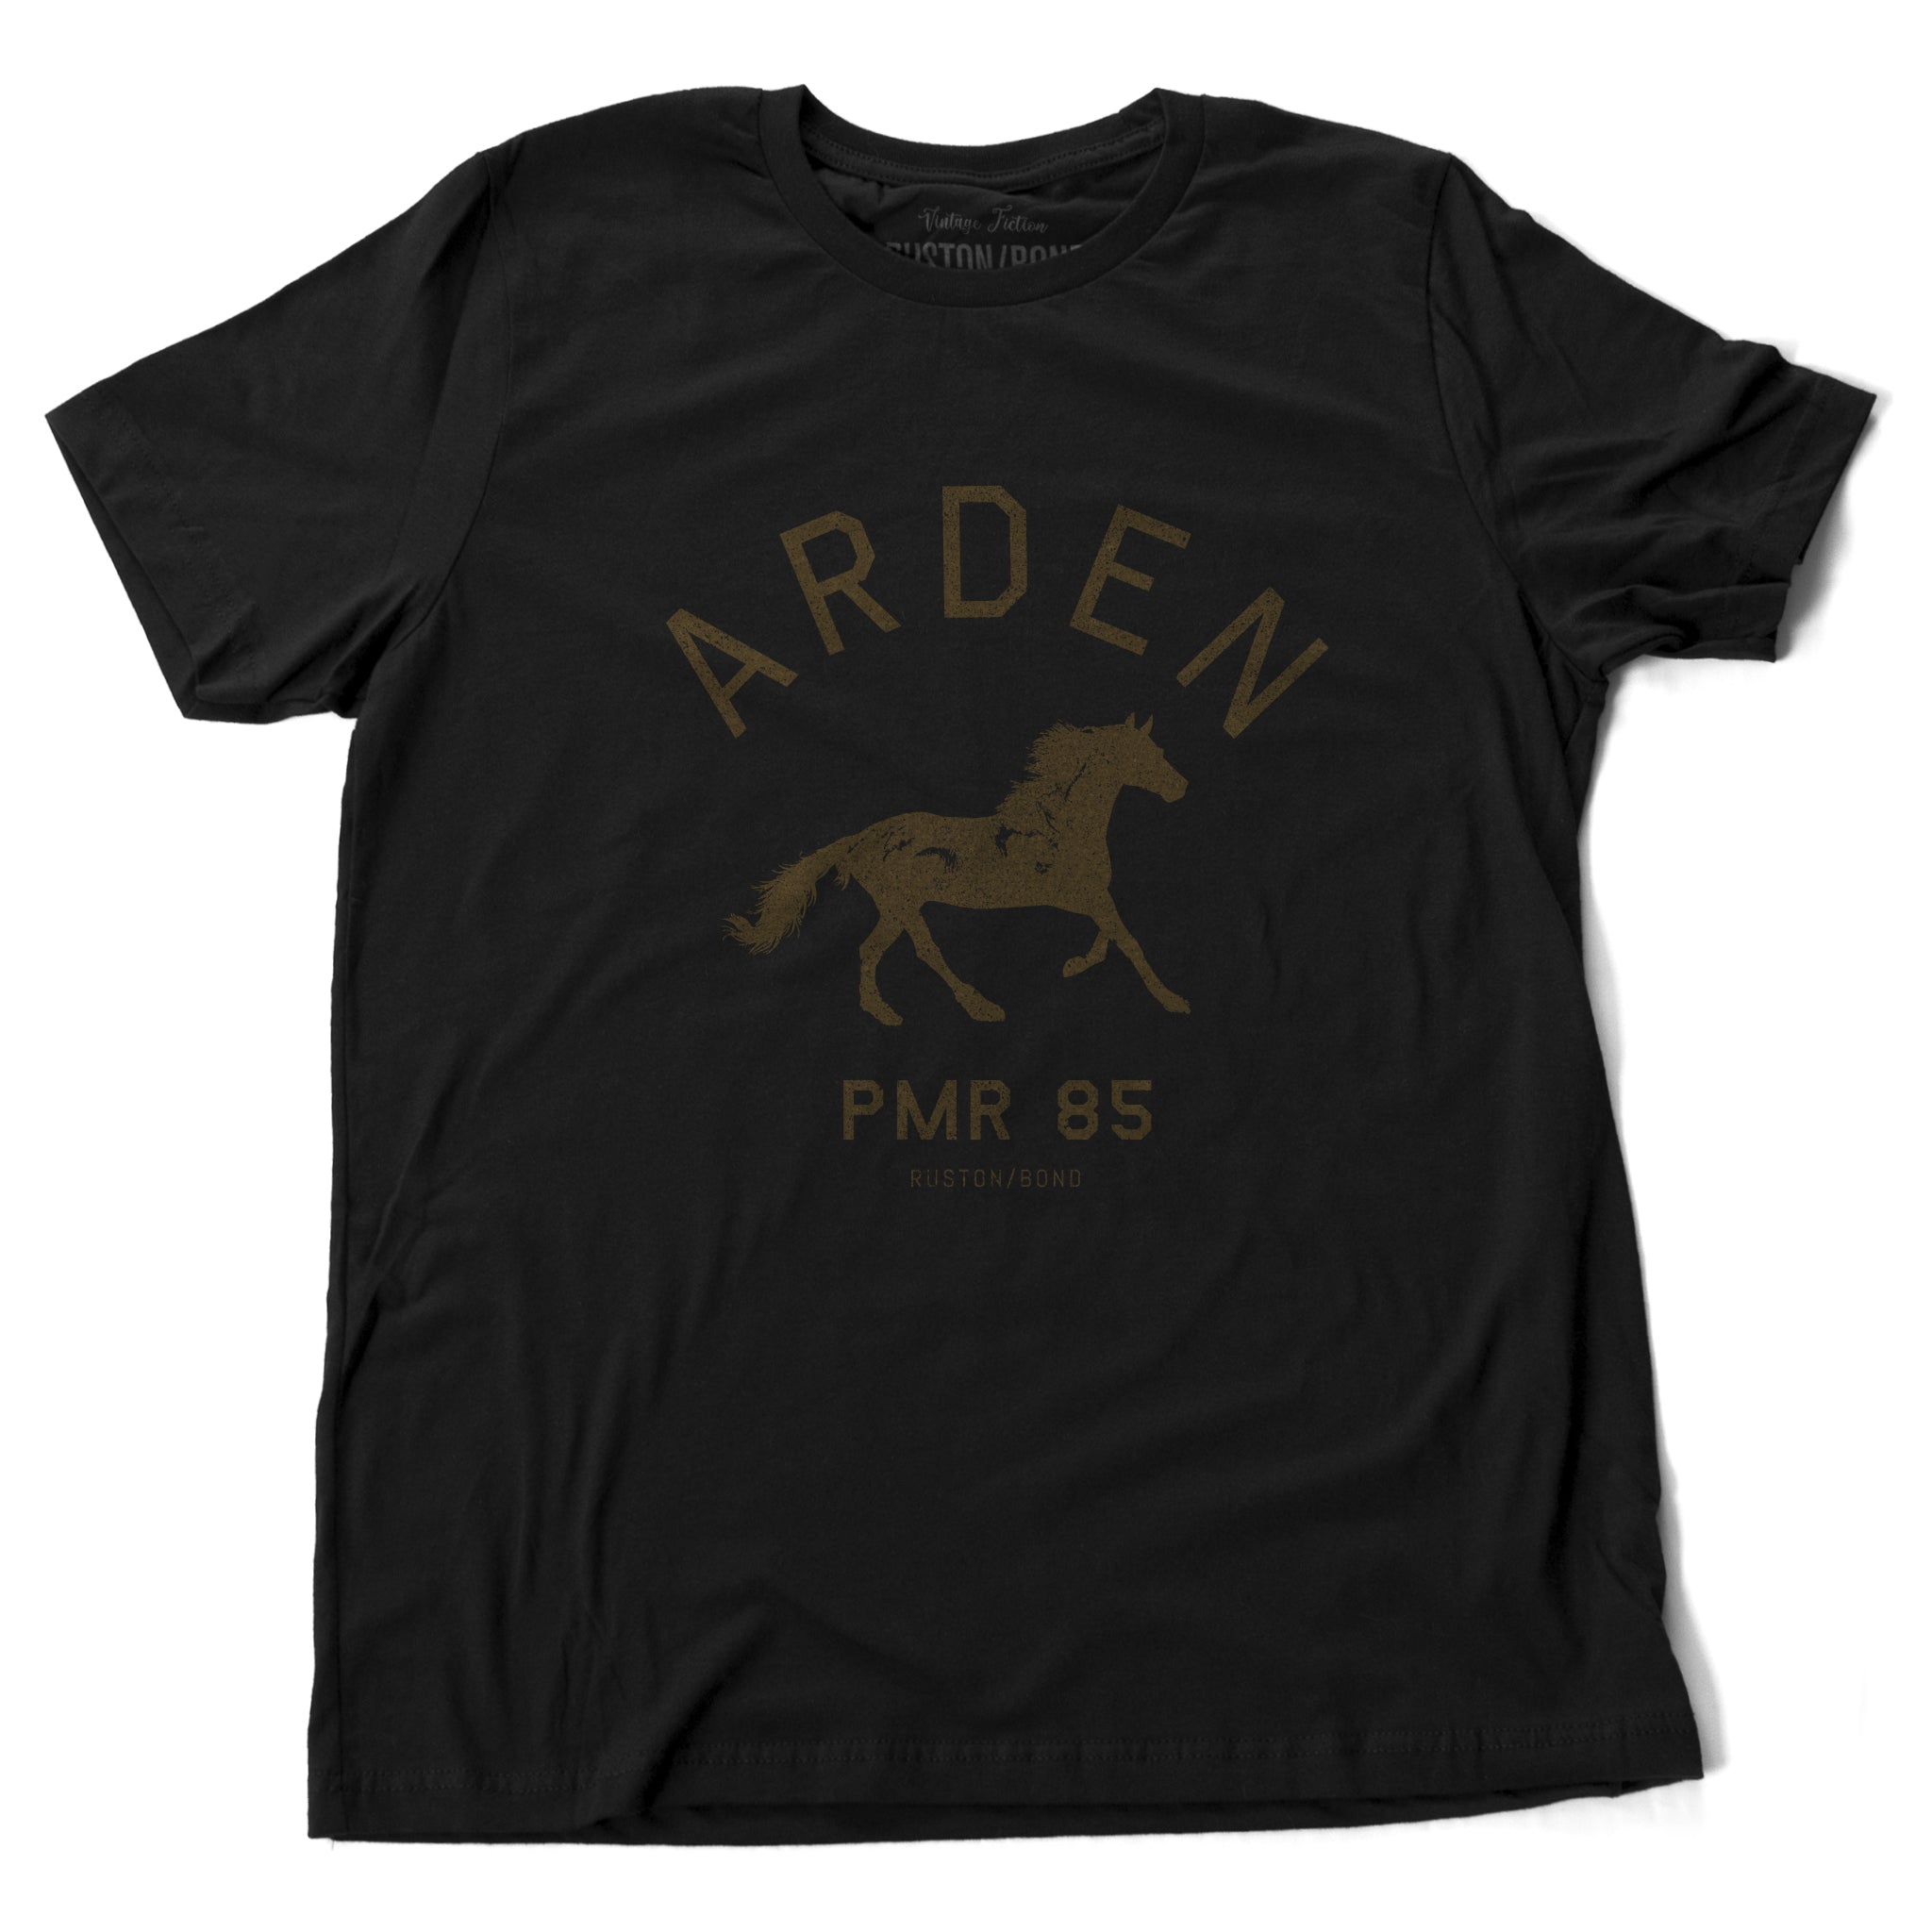 Black vintage, retro-inspired fashion t-shirt, with elegant classic typography and a running horse with an equestrian, horse-riding theme. From wolfsaint.net